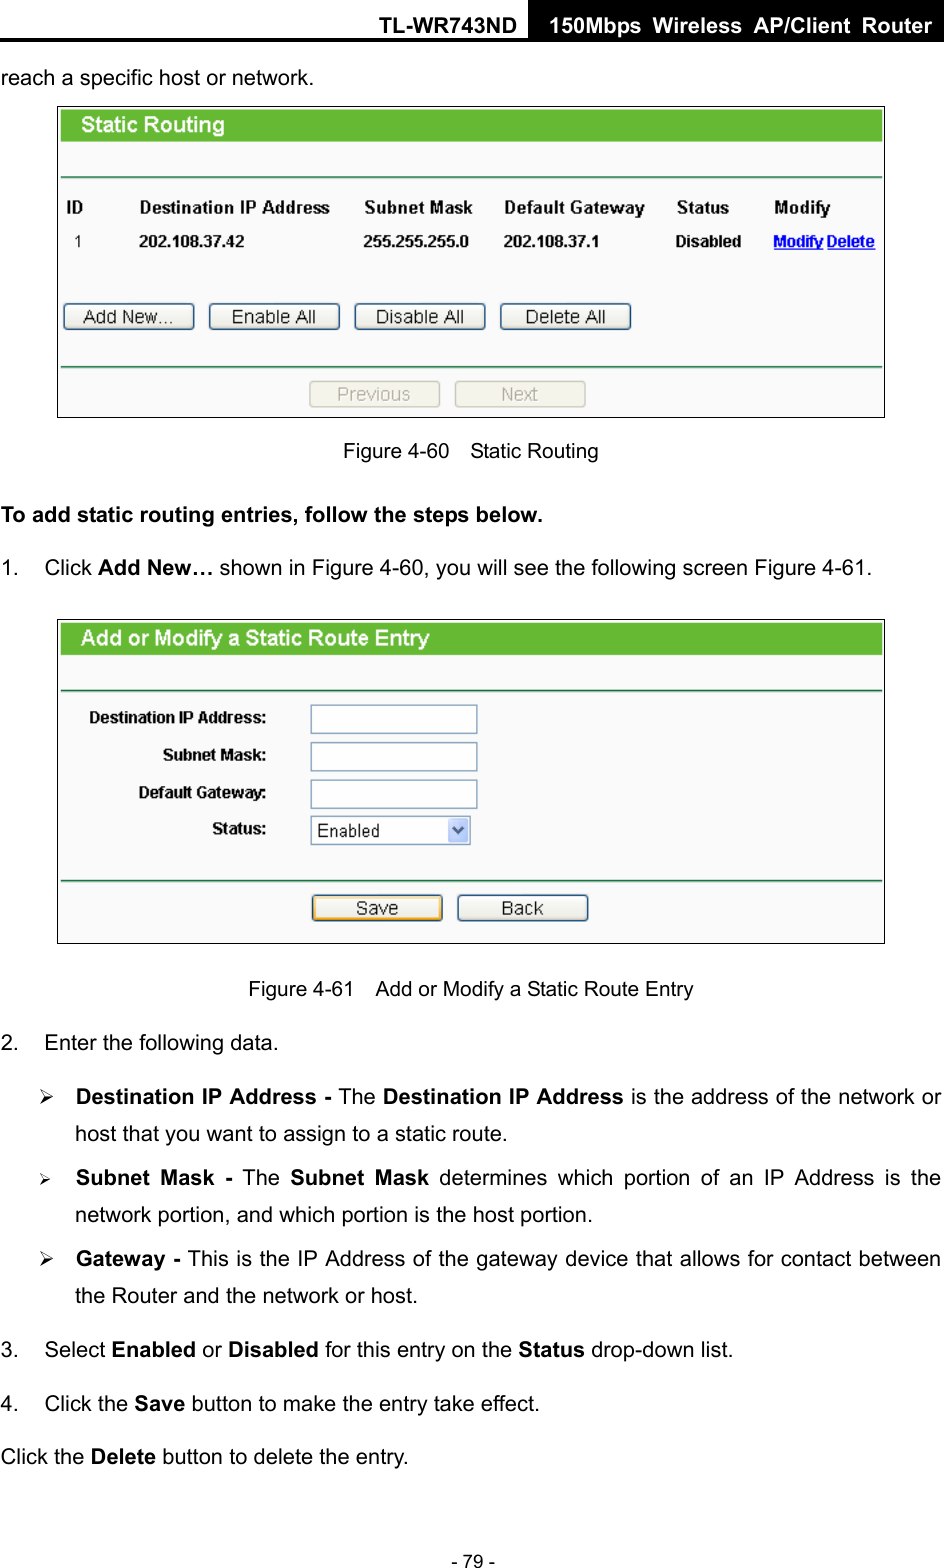 TL-WR743ND 150Mbps Wireless AP/Client Router - 79 - reach a specific host or network.  Figure 4-60  Static Routing To add static routing entries, follow the steps below. 1. Click Add New… shown in Figure 4-60, you will see the following screen Figure 4-61.   Figure 4-61    Add or Modify a Static Route Entry 2.  Enter the following data. ¾ Destination IP Address - The Destination IP Address is the address of the network or host that you want to assign to a static route. ¾ Subnet Mask - The Subnet Mask determines which portion of an IP Address is the network portion, and which portion is the host portion. ¾ Gateway - This is the IP Address of the gateway device that allows for contact between the Router and the network or host. 3. Select Enabled or Disabled for this entry on the Status drop-down list. 4. Click the Save button to make the entry take effect. Click the Delete button to delete the entry. 